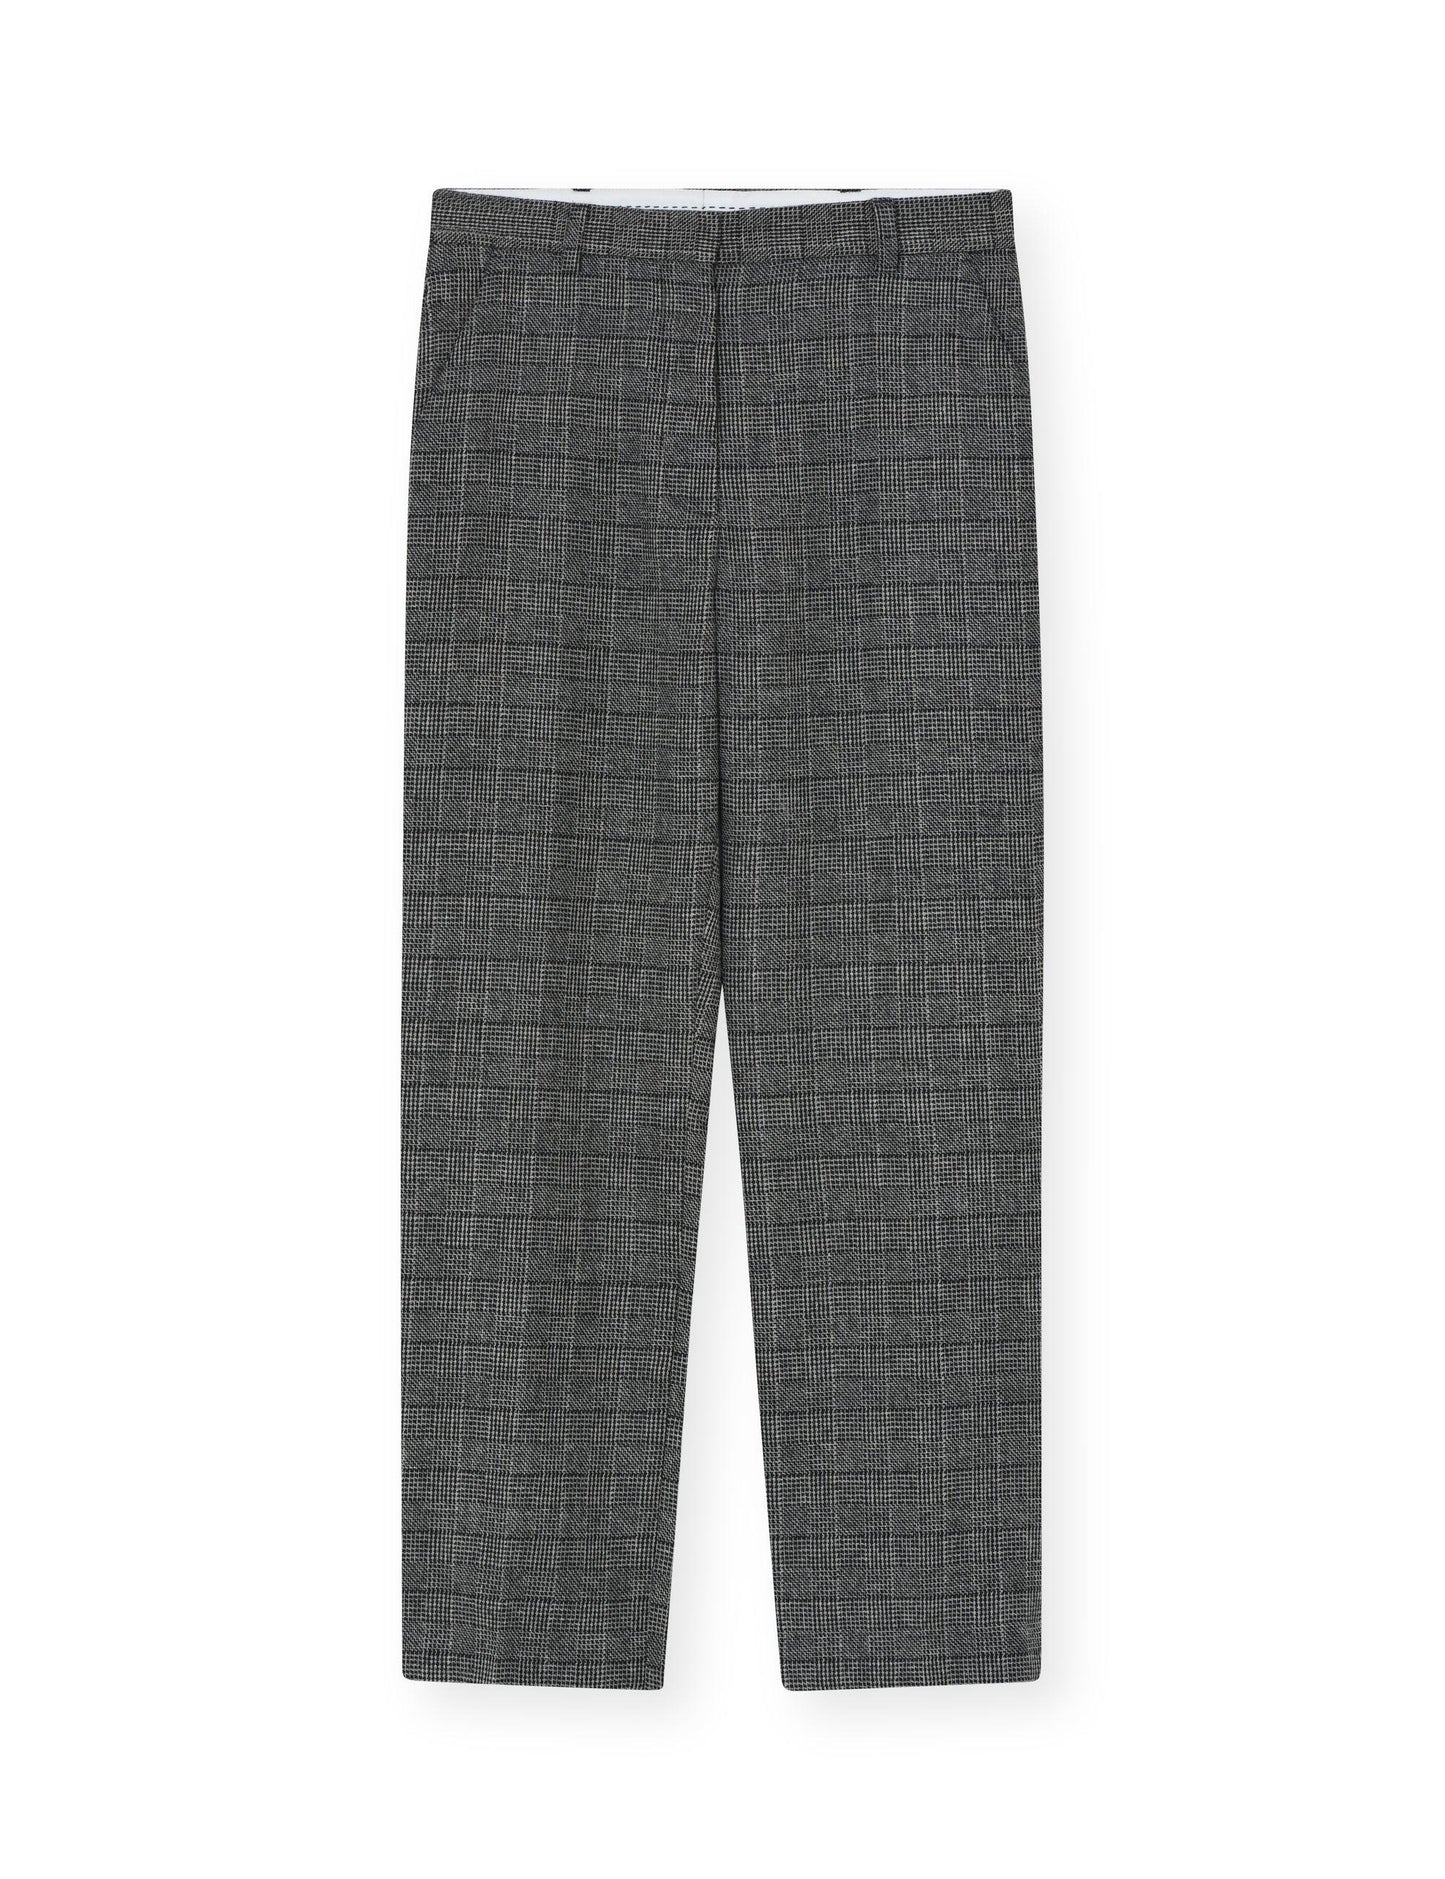 DAY BIRGER - Enzo Check Wool Trousers - 32 The Guild